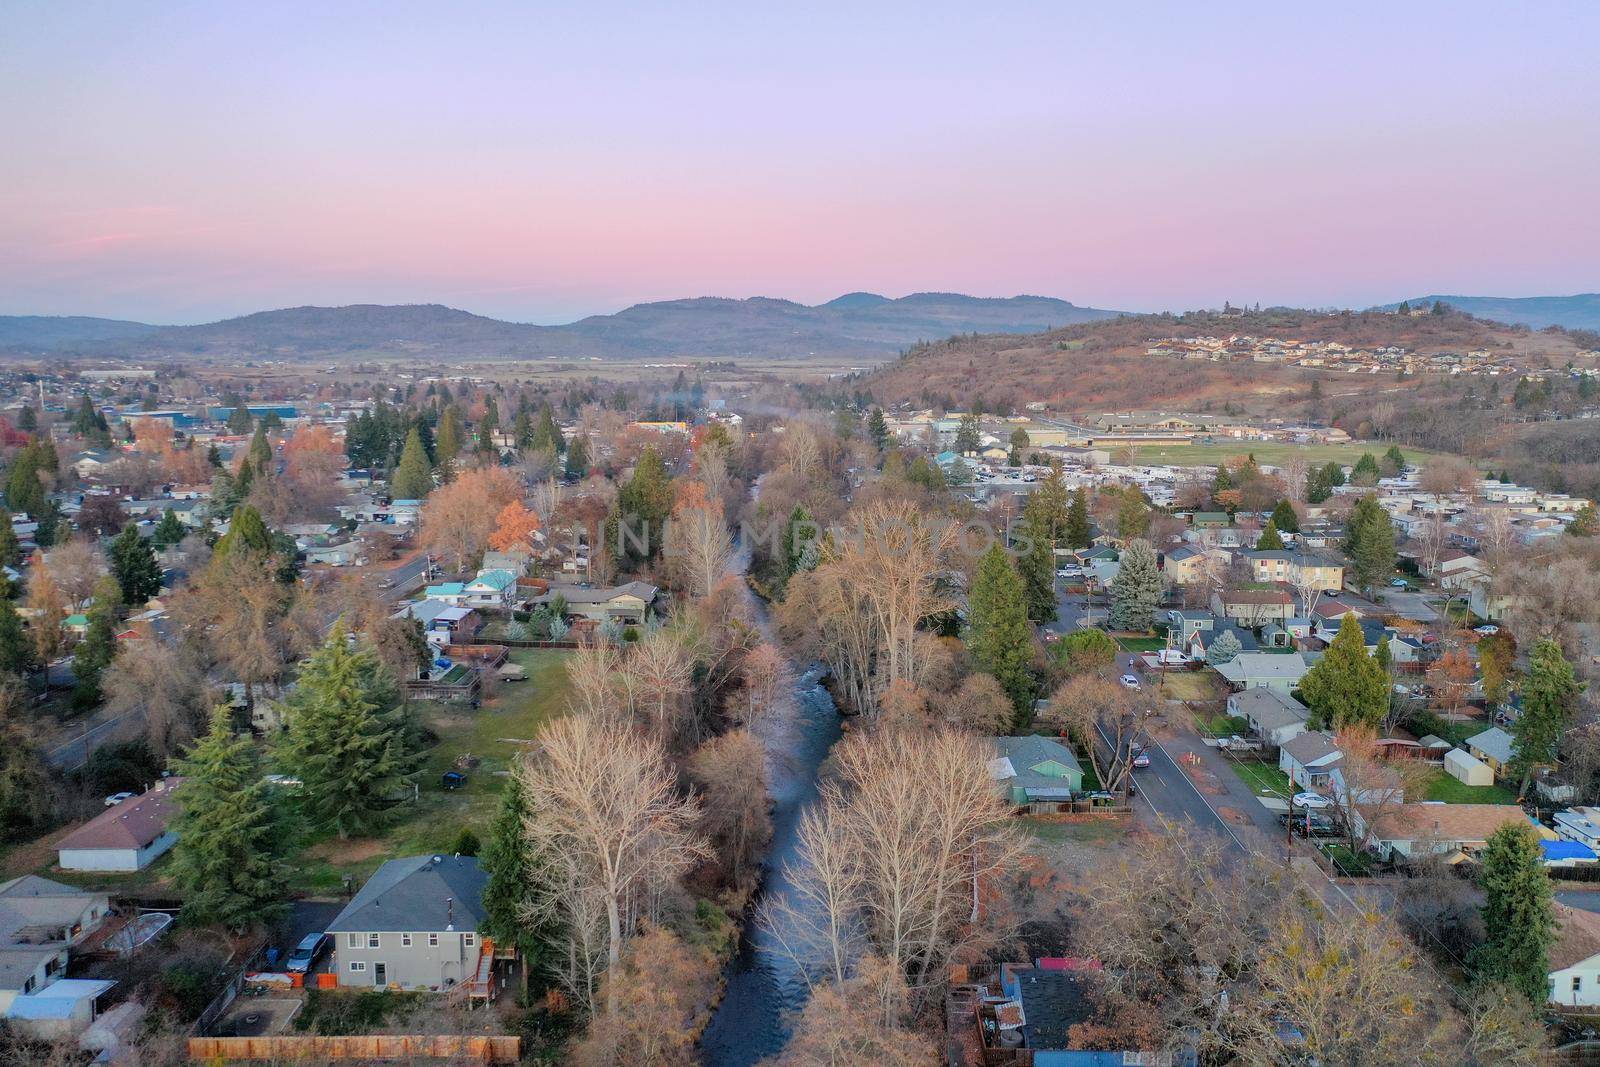 Peaceful town surrounded by trees with mountains as background during sunset. Aerial view of roads and houses surrounded by autumn-colored nature. Rural town landscape